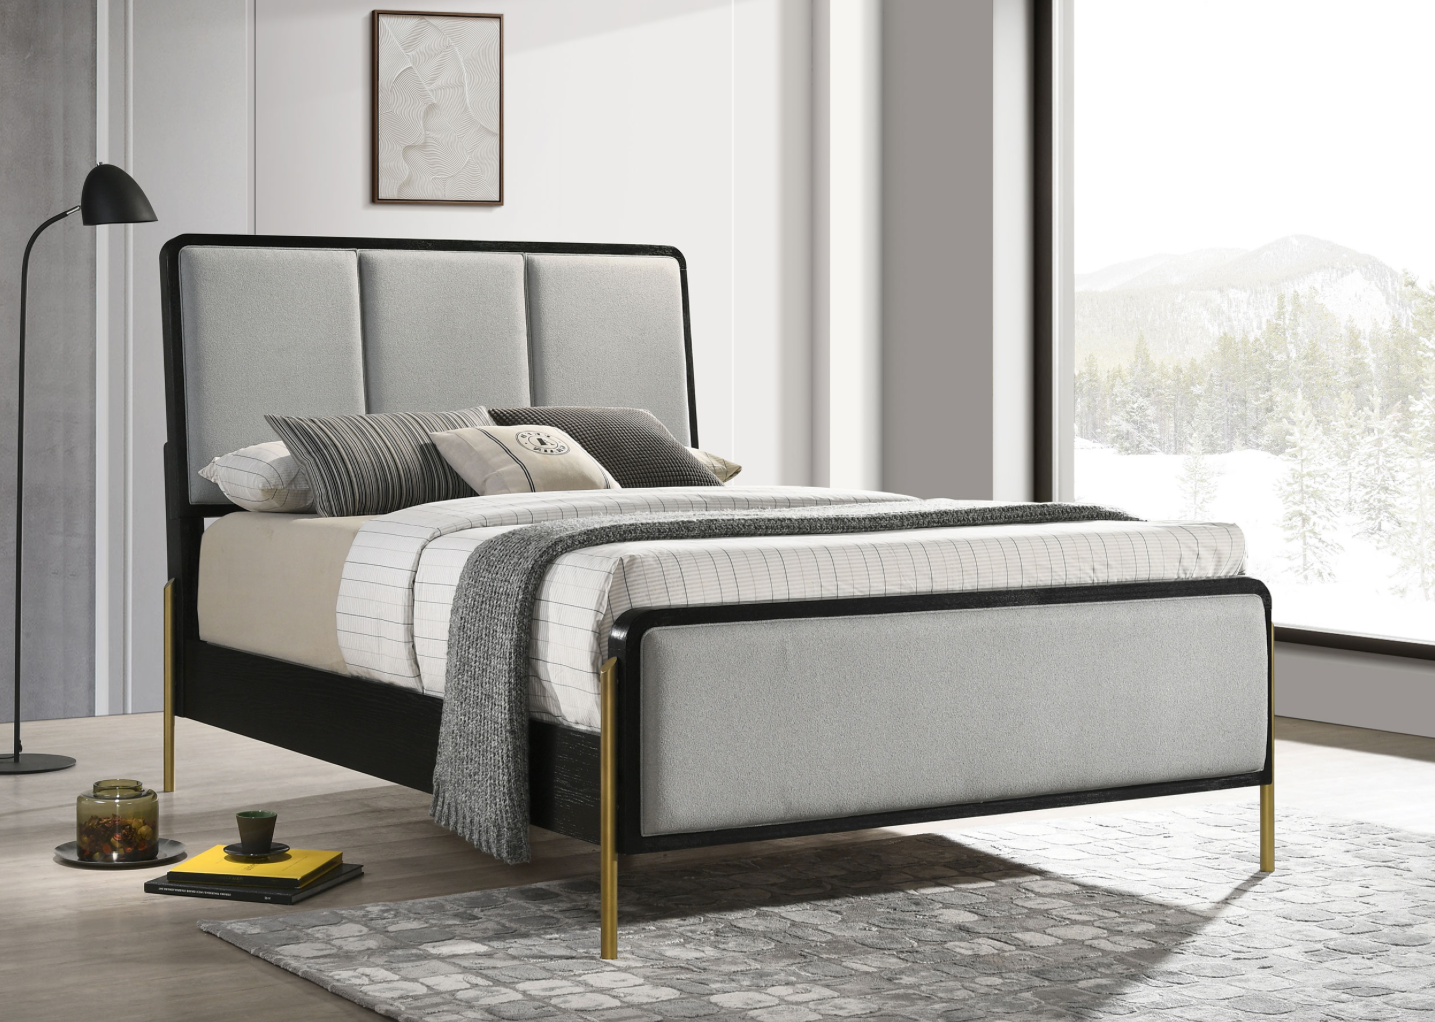 Arini Queen Bedroom Set With Upholstered Headboard Black And Grey